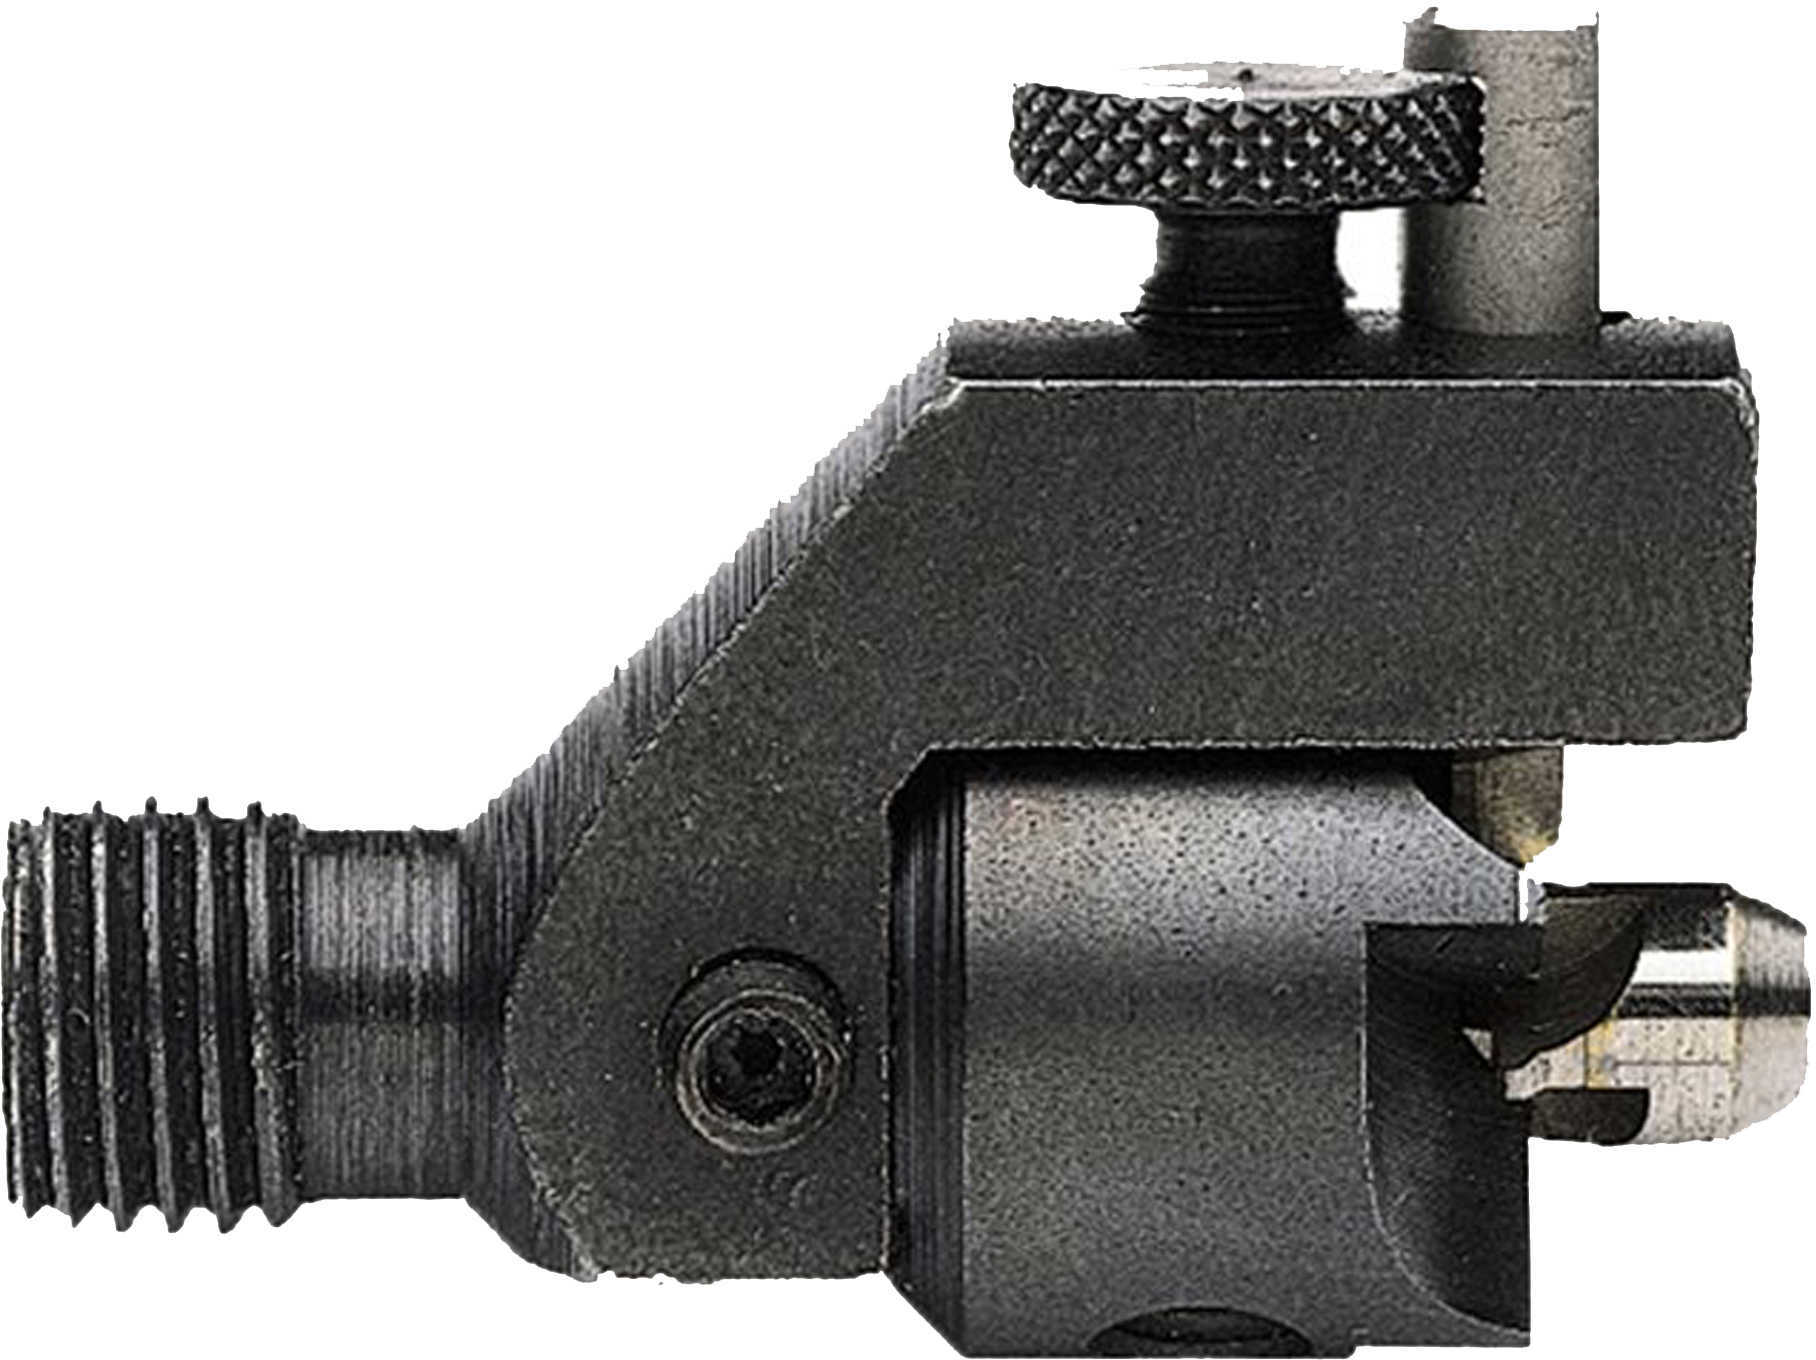 RCBS Trim Pro 3-Way Cutter For 270 Caliber Md: 90282